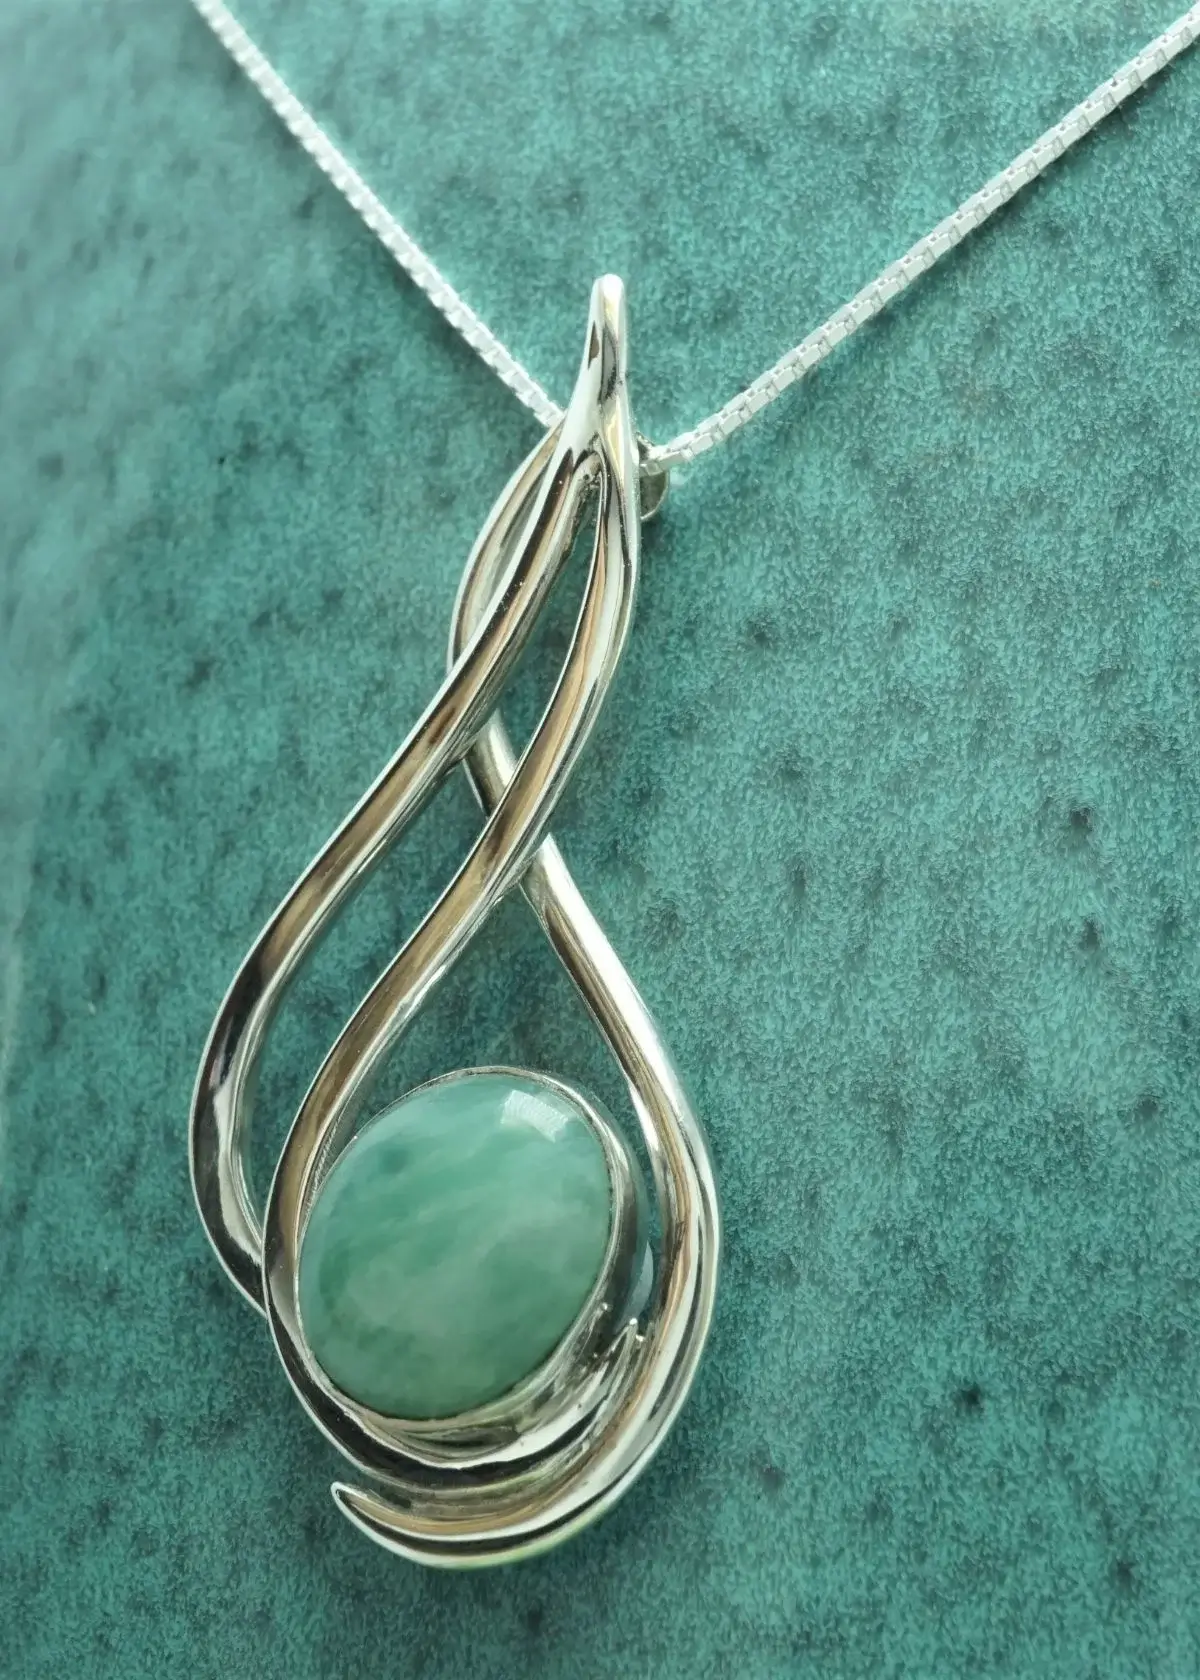 What are the Properties of Amazonite?